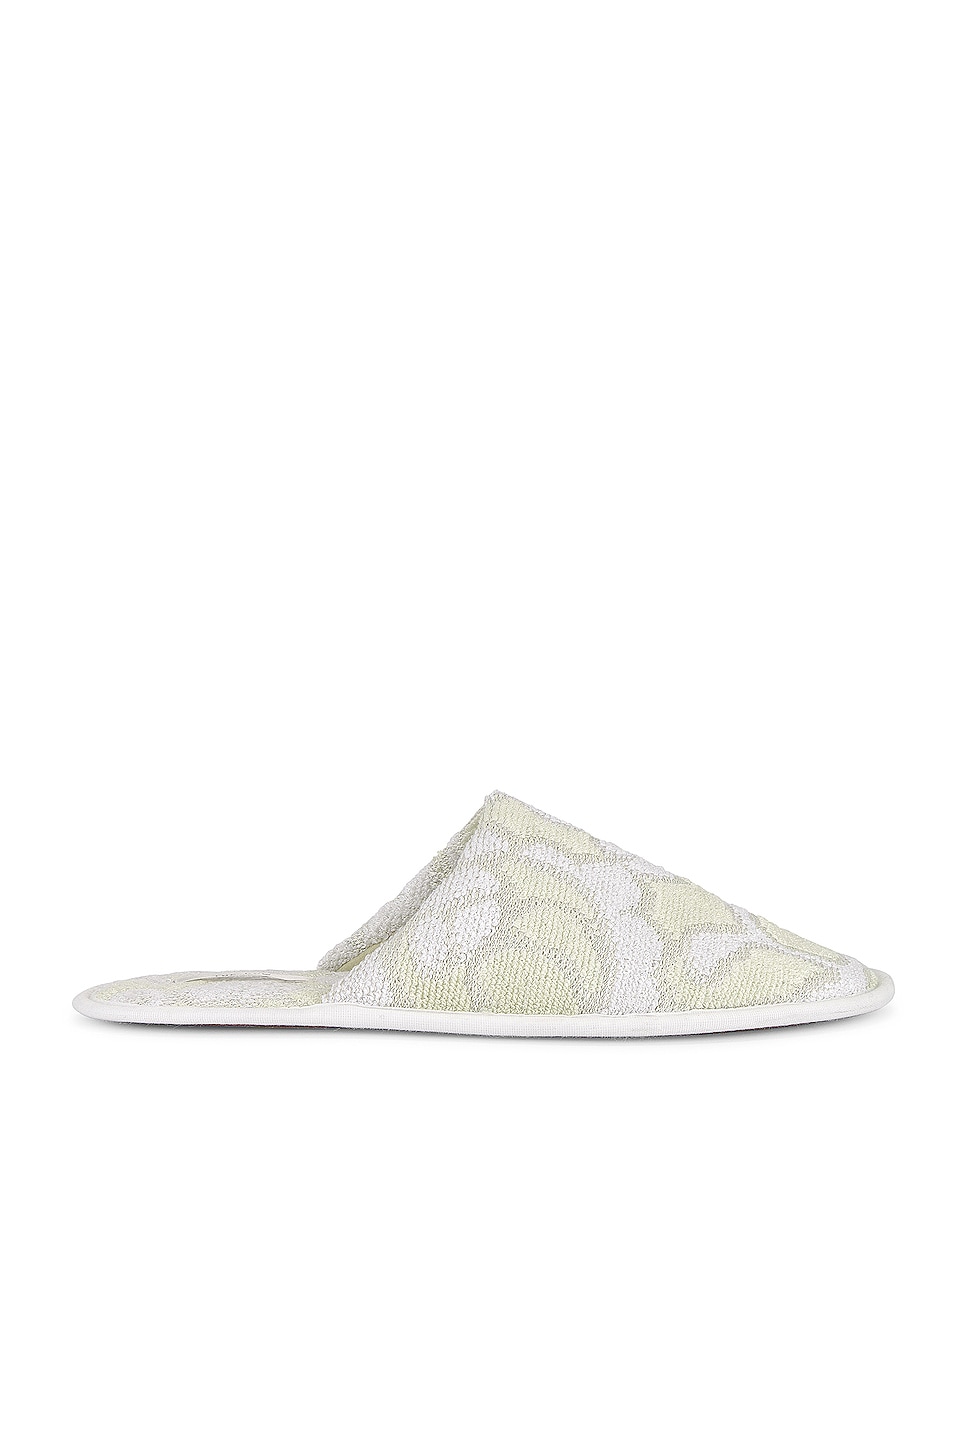 Image 1 of The Row Frances Slipper in Lime & Fog